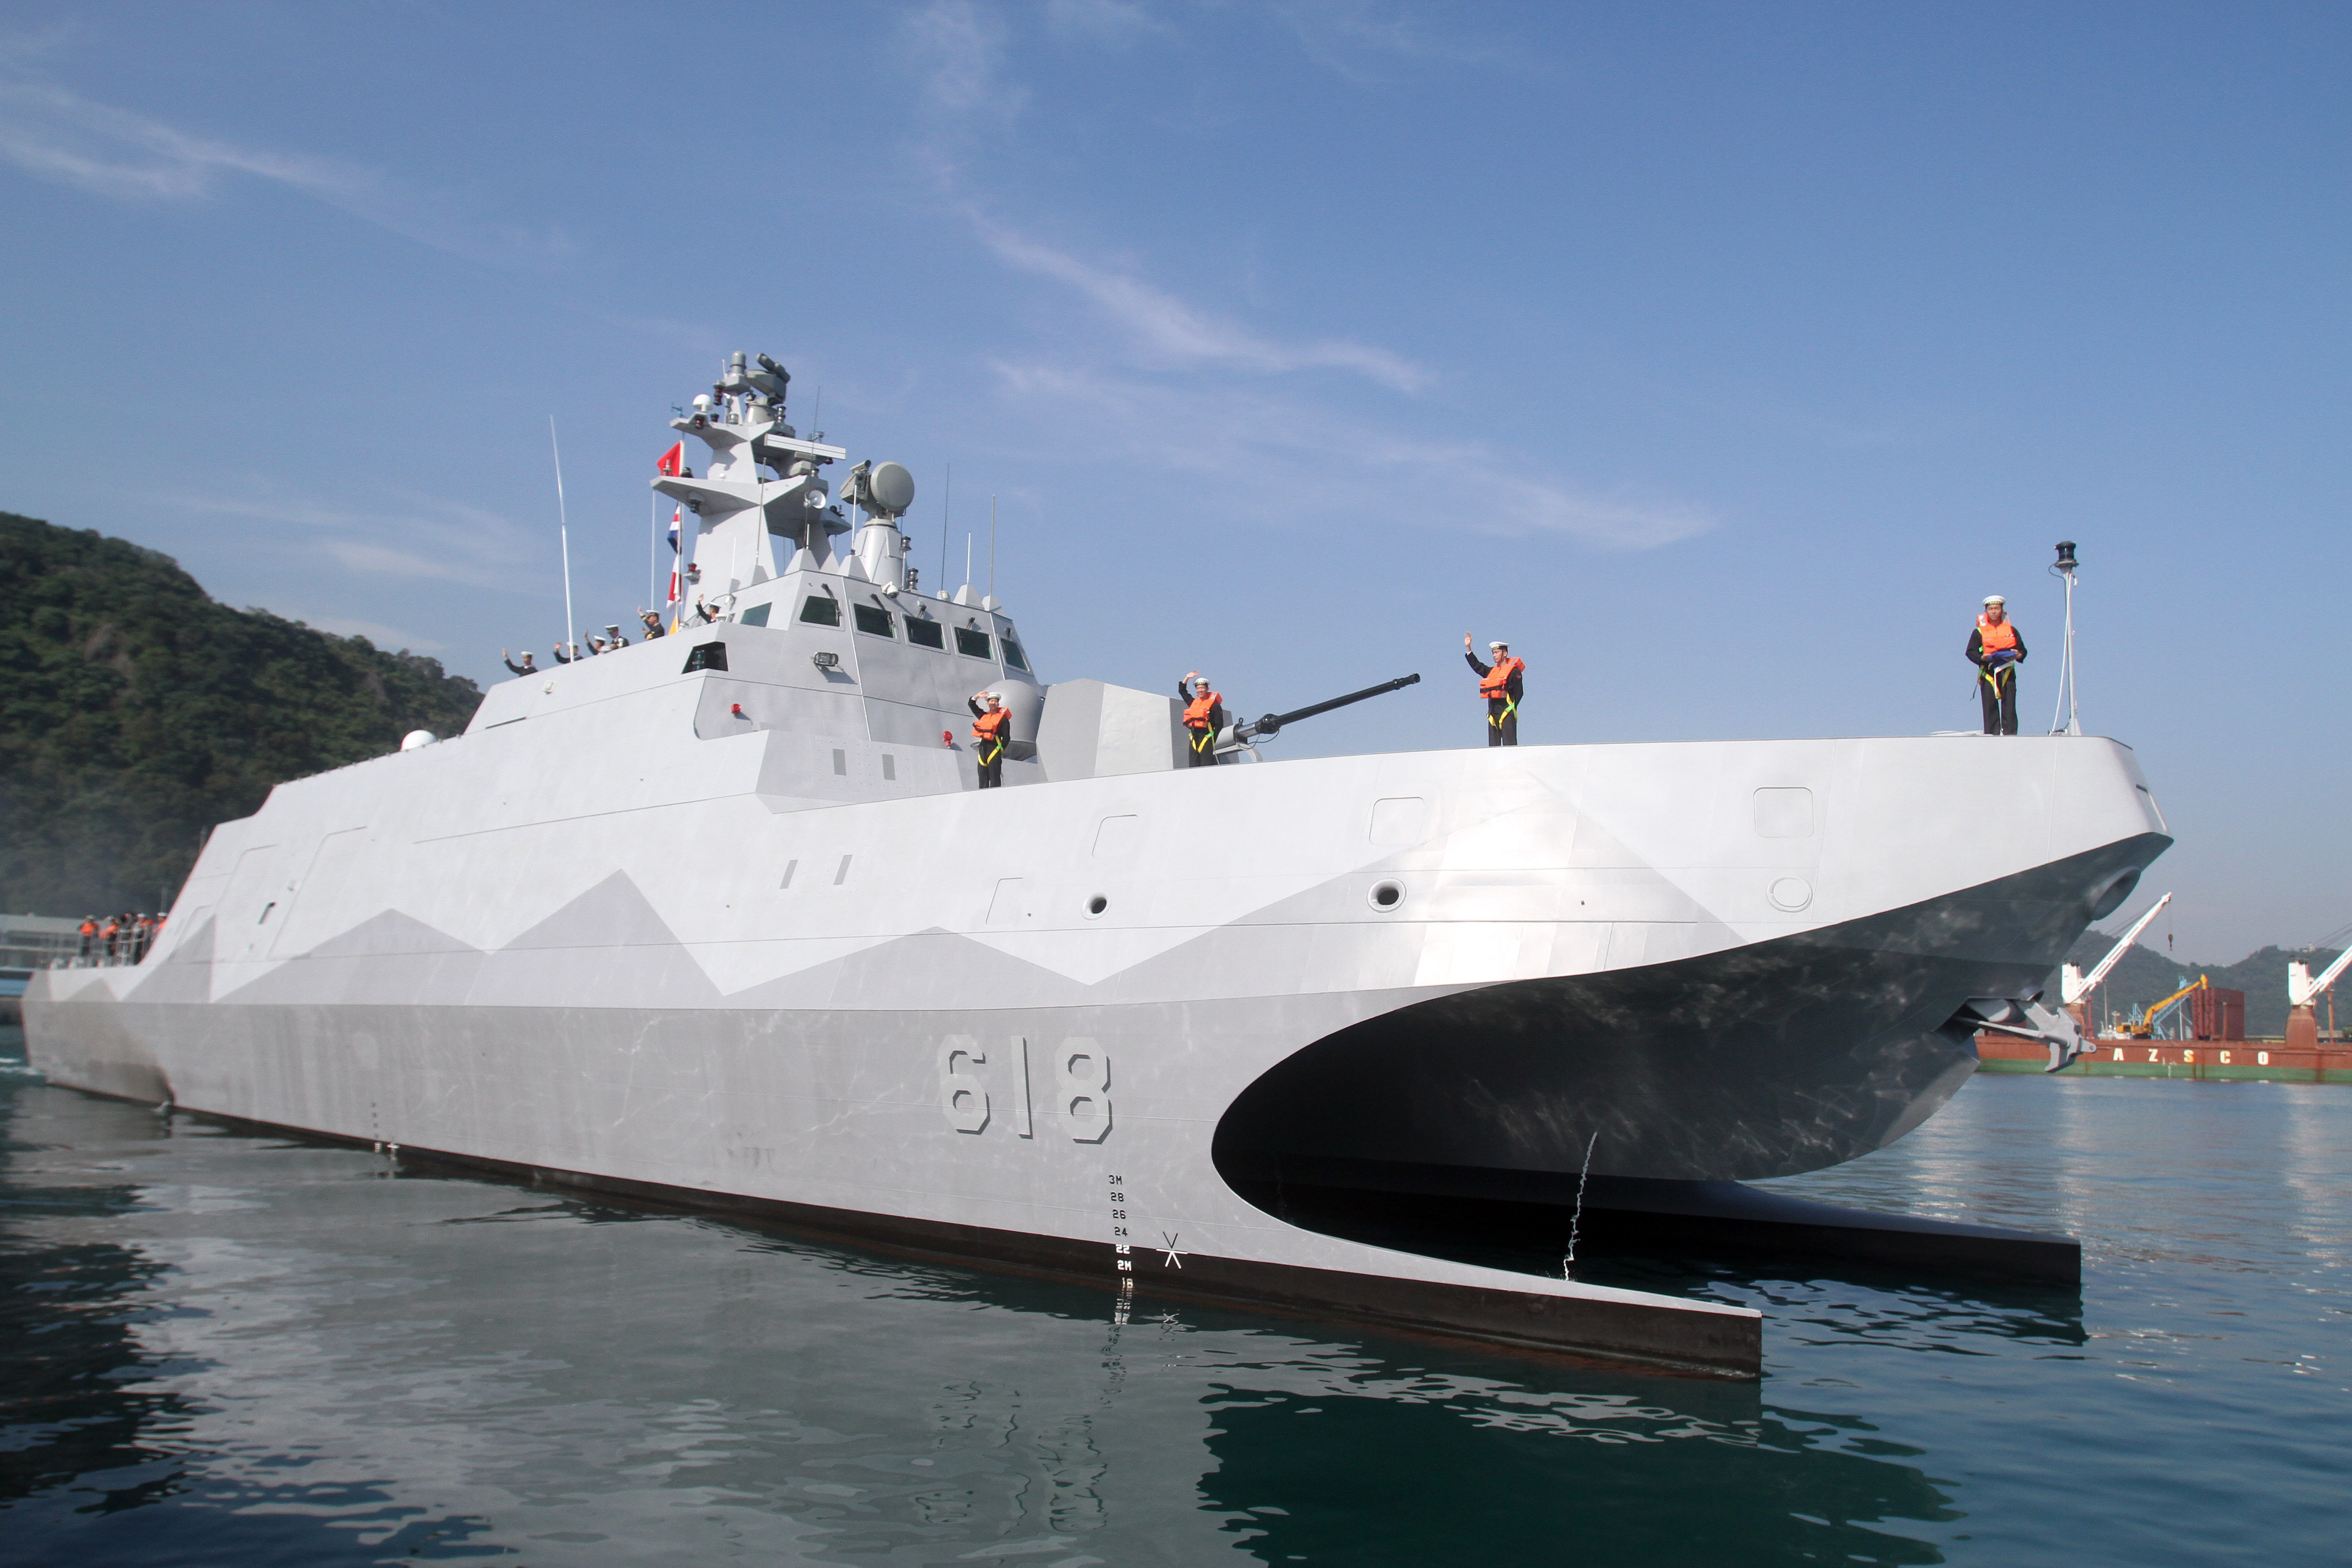 Taiwan Navy sailors and officers wave as the Taiwan-made patrol guard corvette Tuo Jiang sets sail during the handover ceremony at Suao port in Yilan county, northeast Taiwan, on Tuesday. | AP